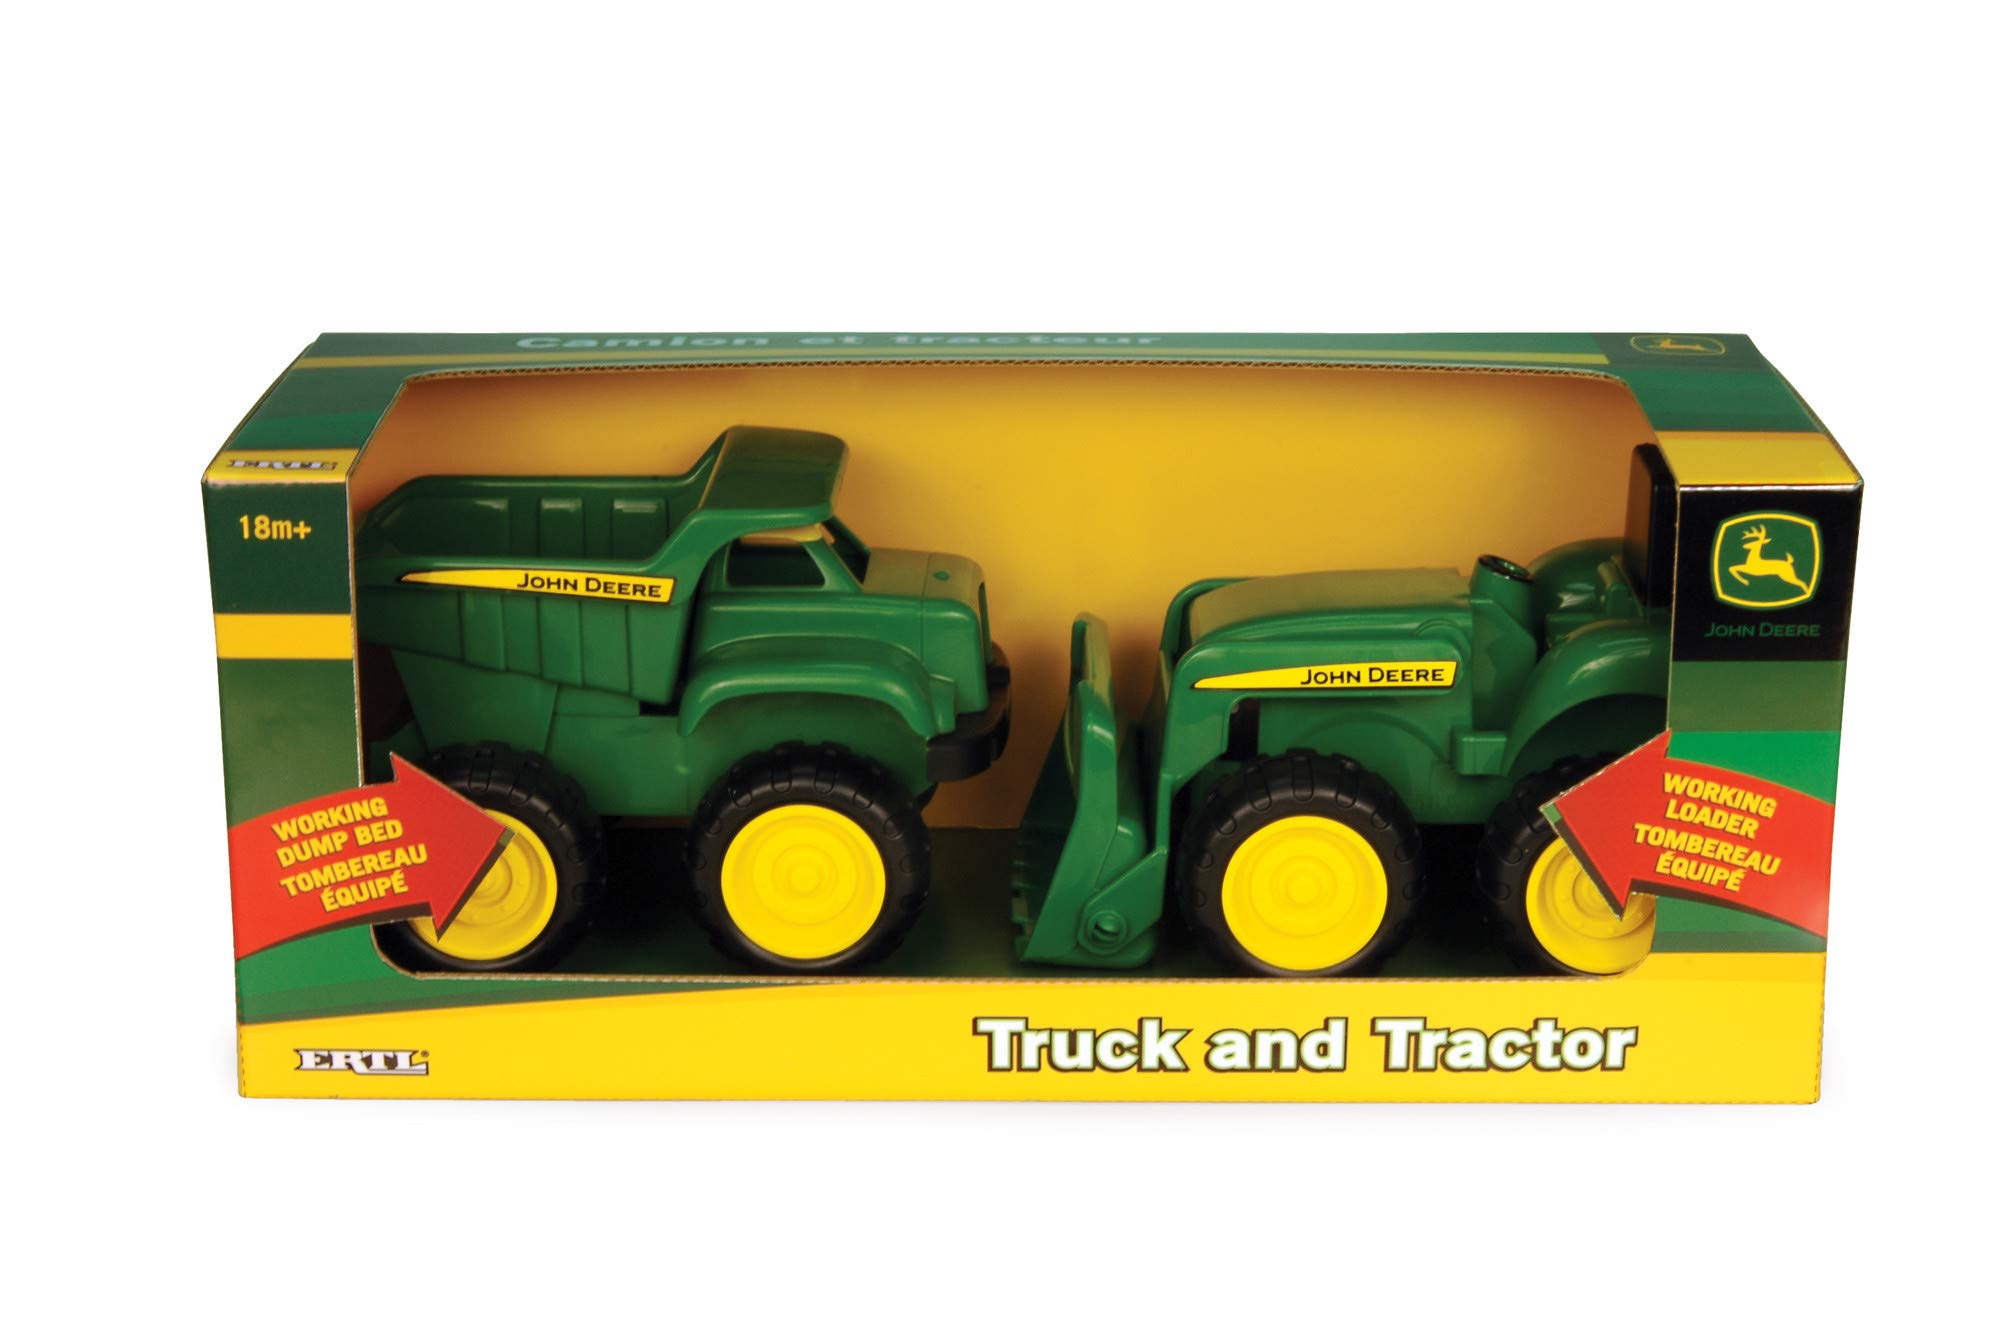 John Deere Vehicle Set - Includes Dump Truck Toy and Tractor Toy with Loader - Ages 18 Months and Up - 6 Inch, Green, 2 Count